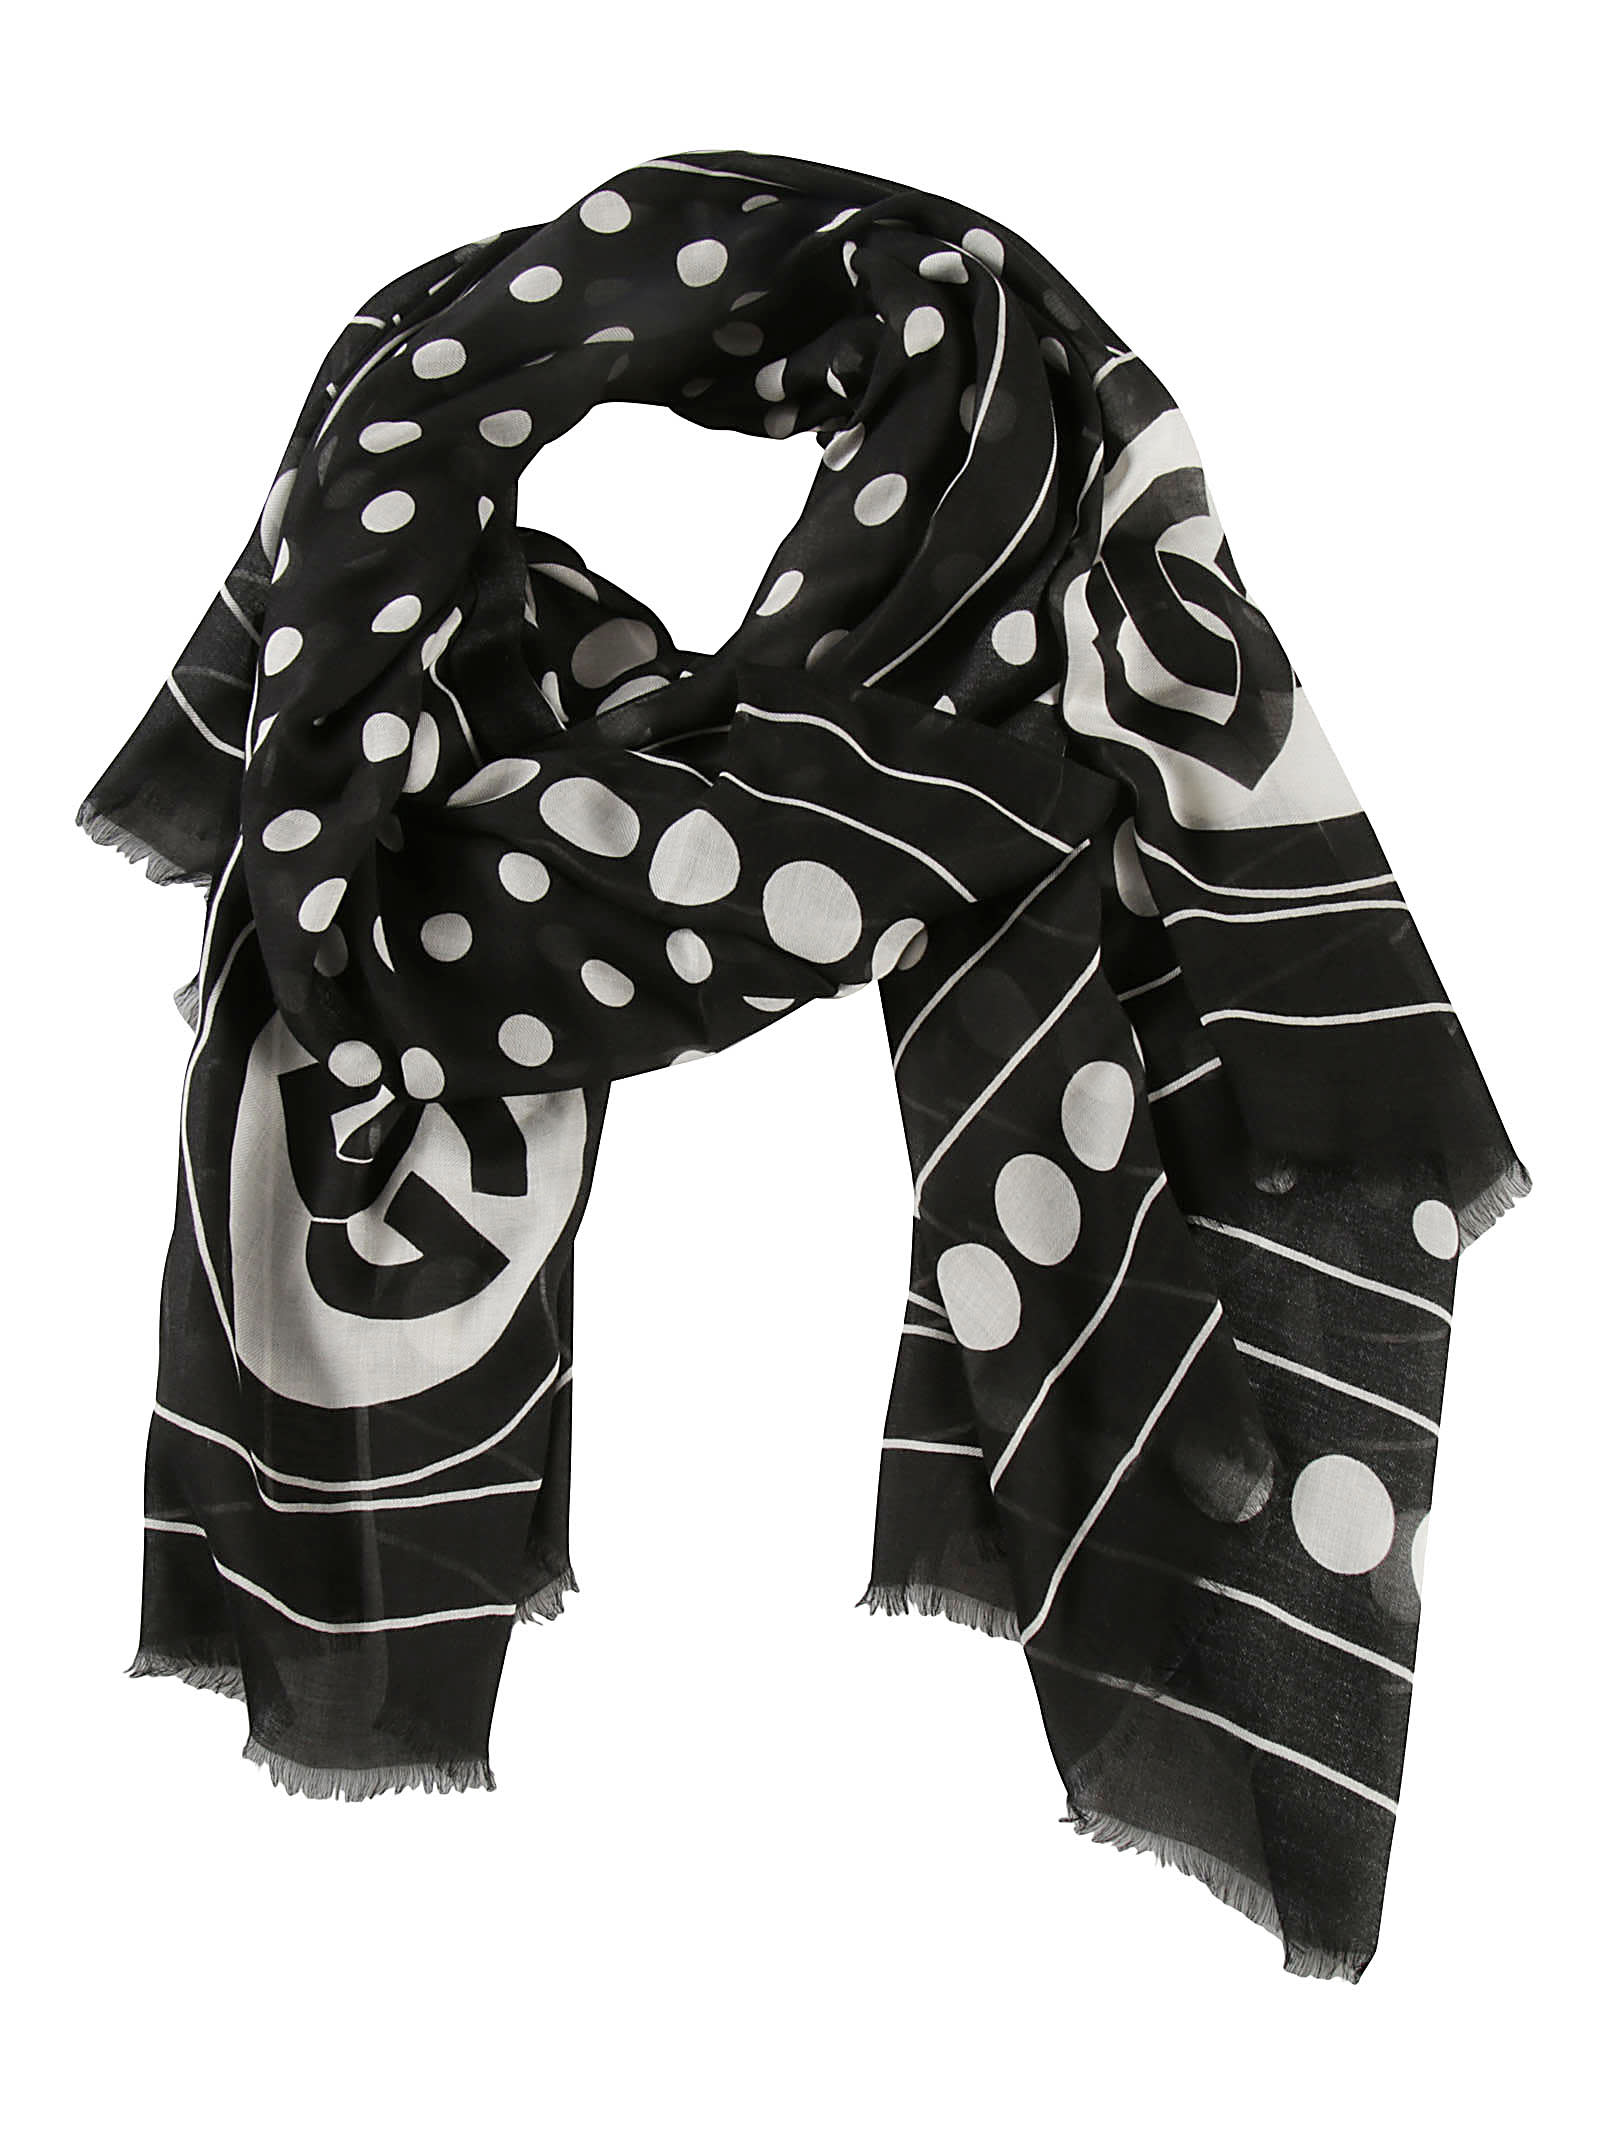 Dolce & Gabbana Spotted Print Scarf